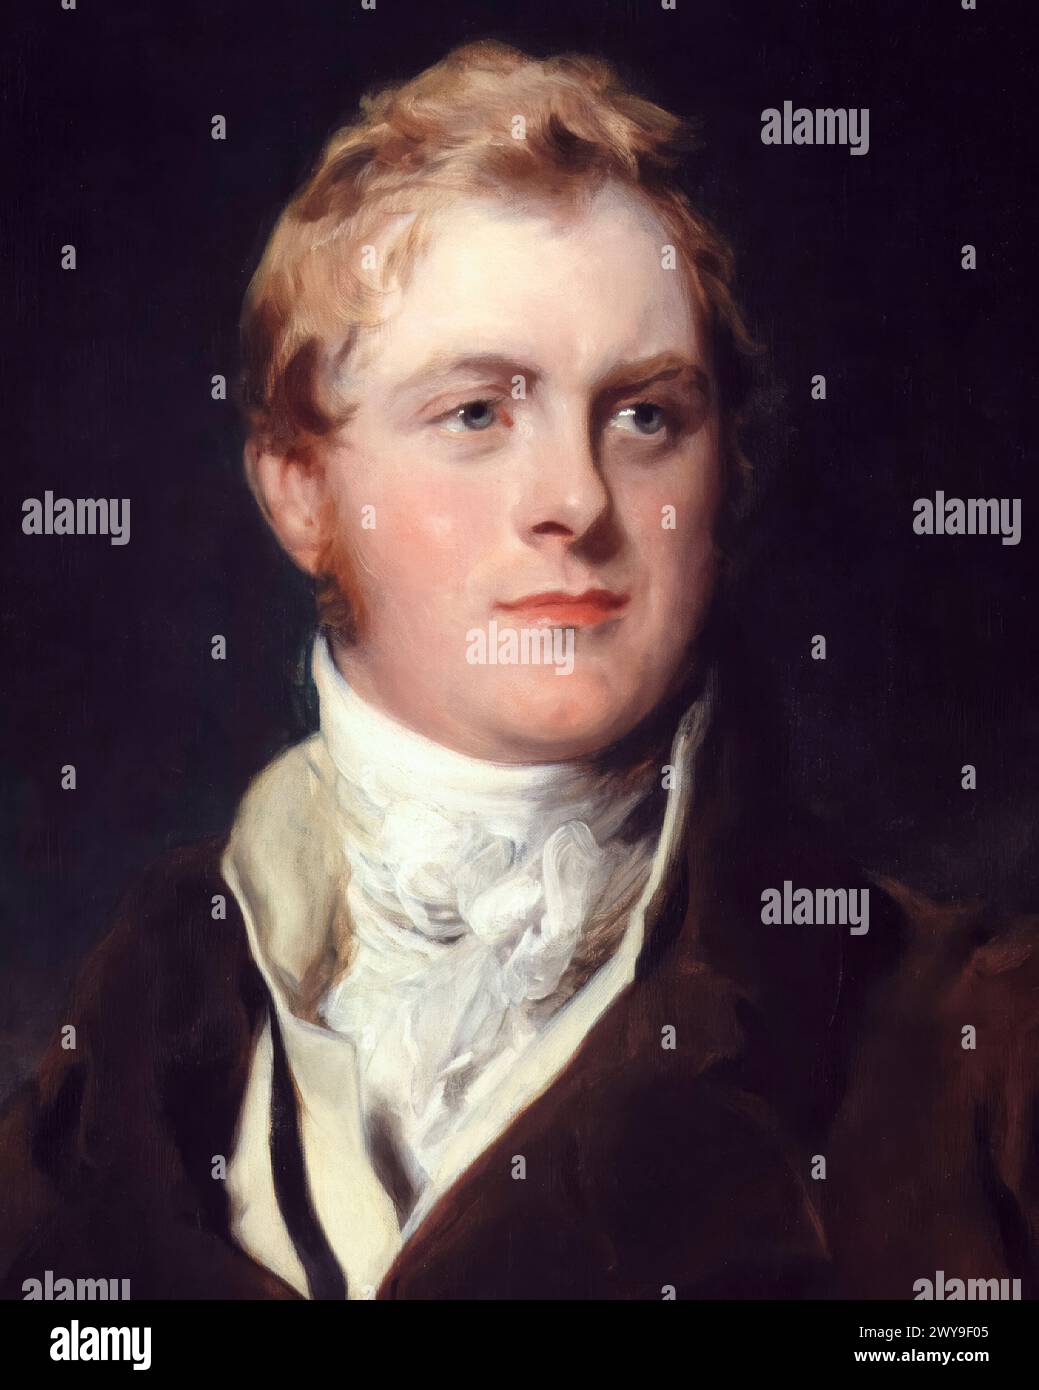 Frederick John Robinson, 1st Viscount Goderich (1782-1859), Tory politician and Prime Minister of the United Kingdom 1827-1828, portrait painting in oil on canvas by Sir Thomas Lawrence, circa 1824 Stock Photo